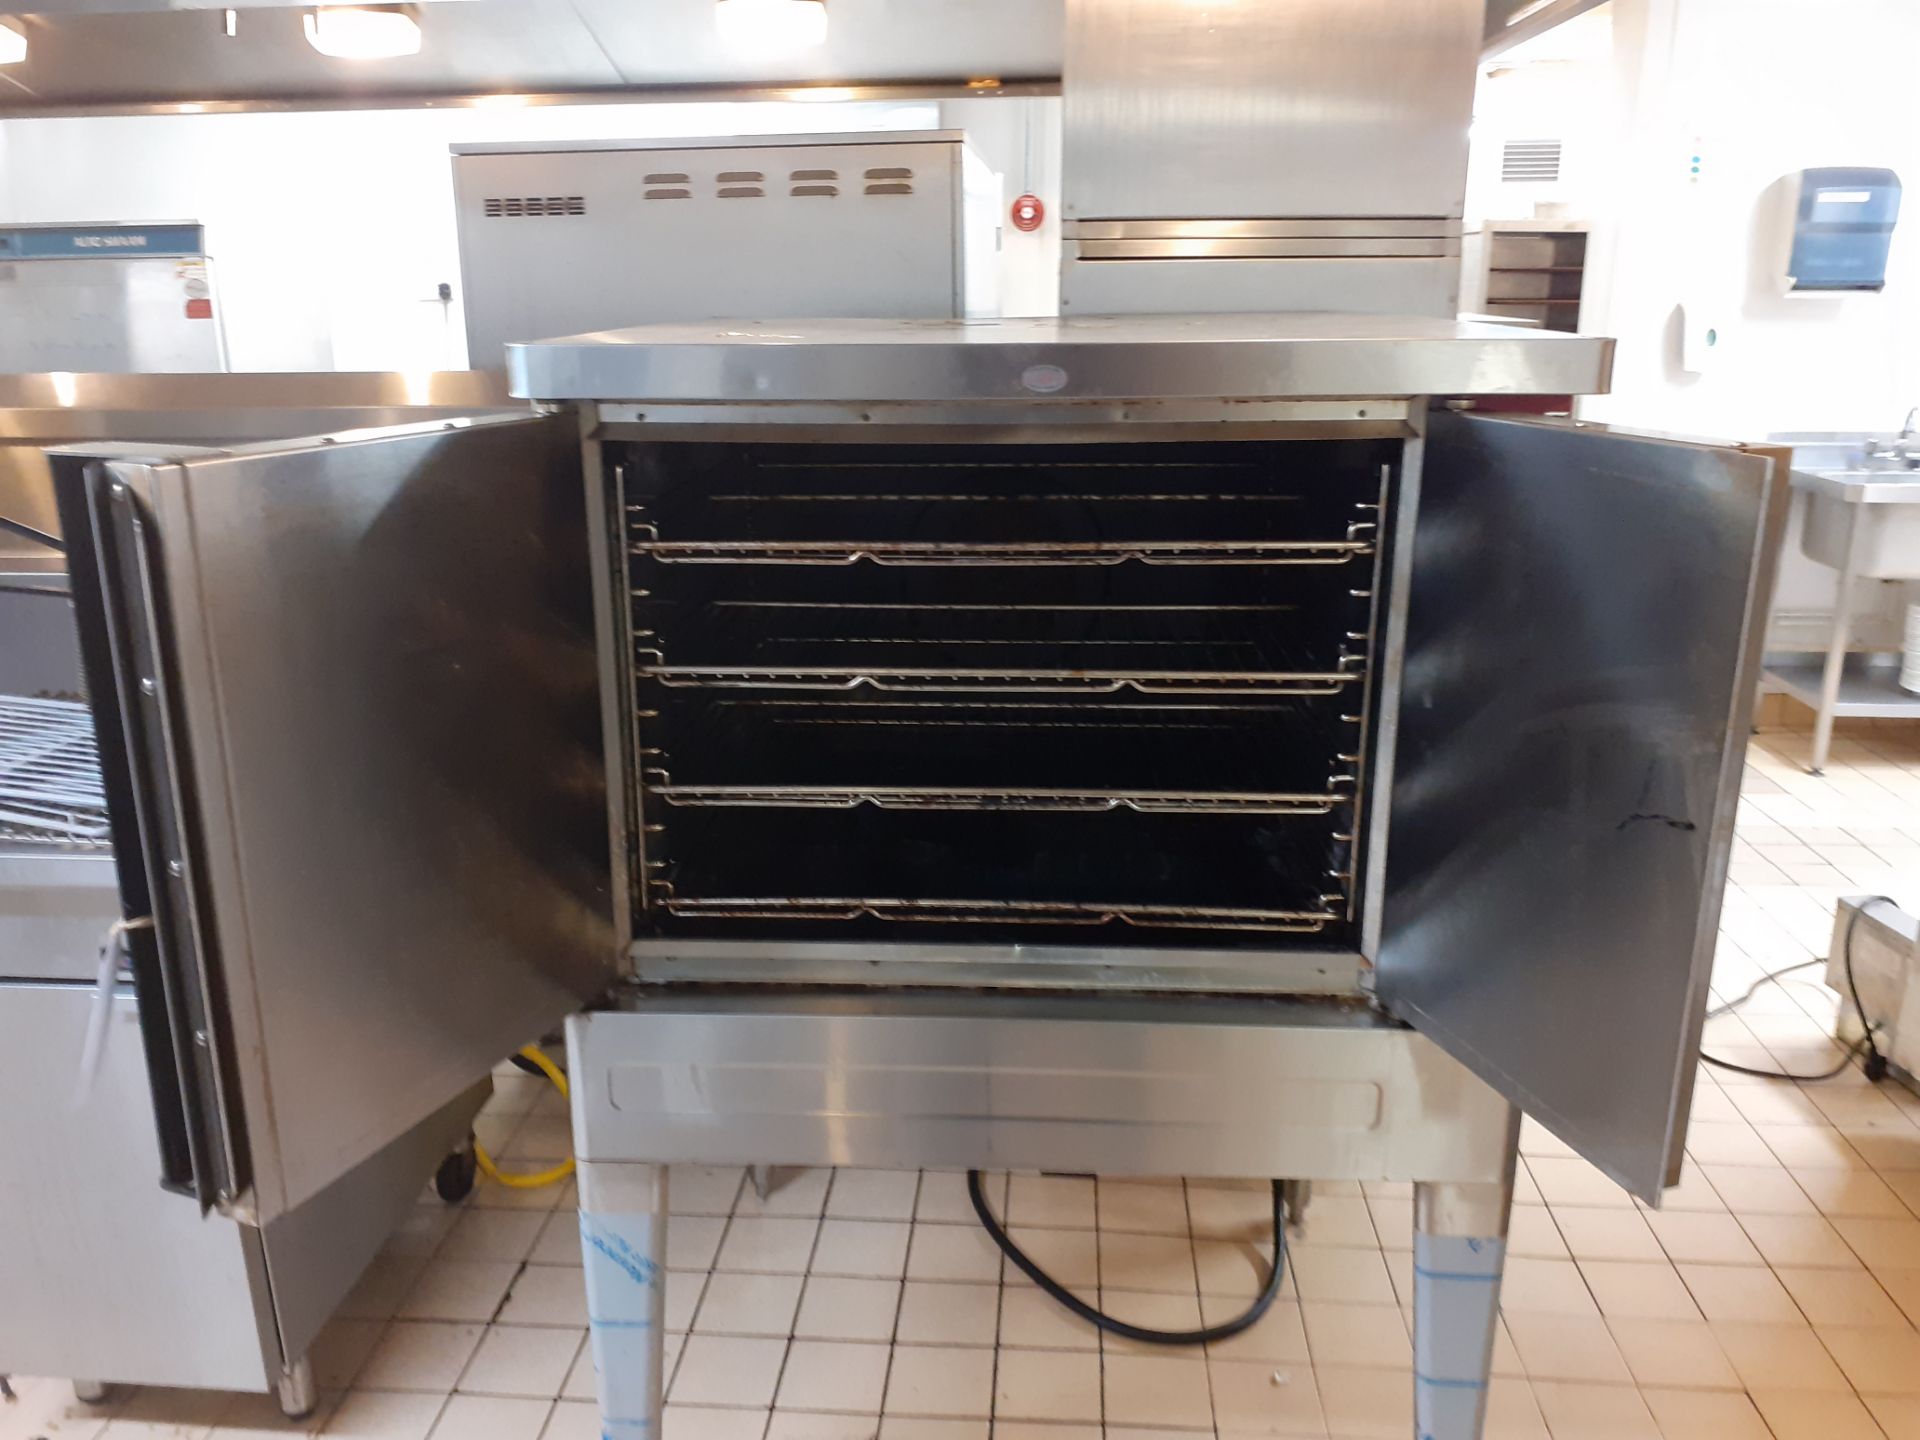 Blodgett Zephaire G Electric Convection Oven - Image 3 of 4